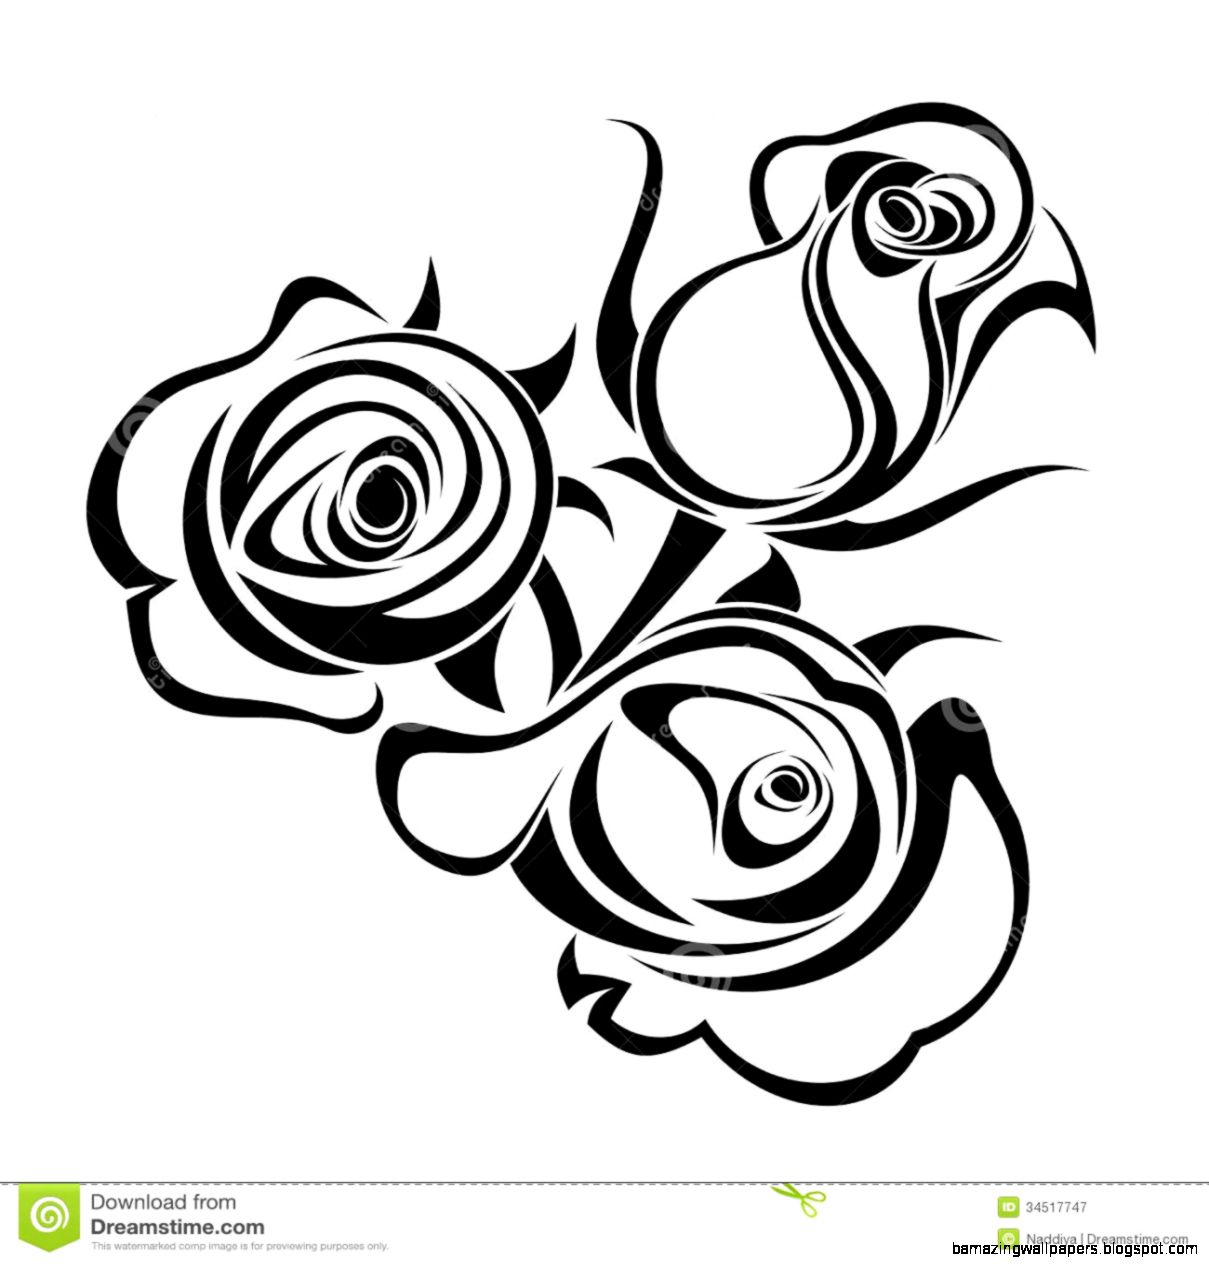 Top 102+ Images rose bouquet clip art black and white Sharp